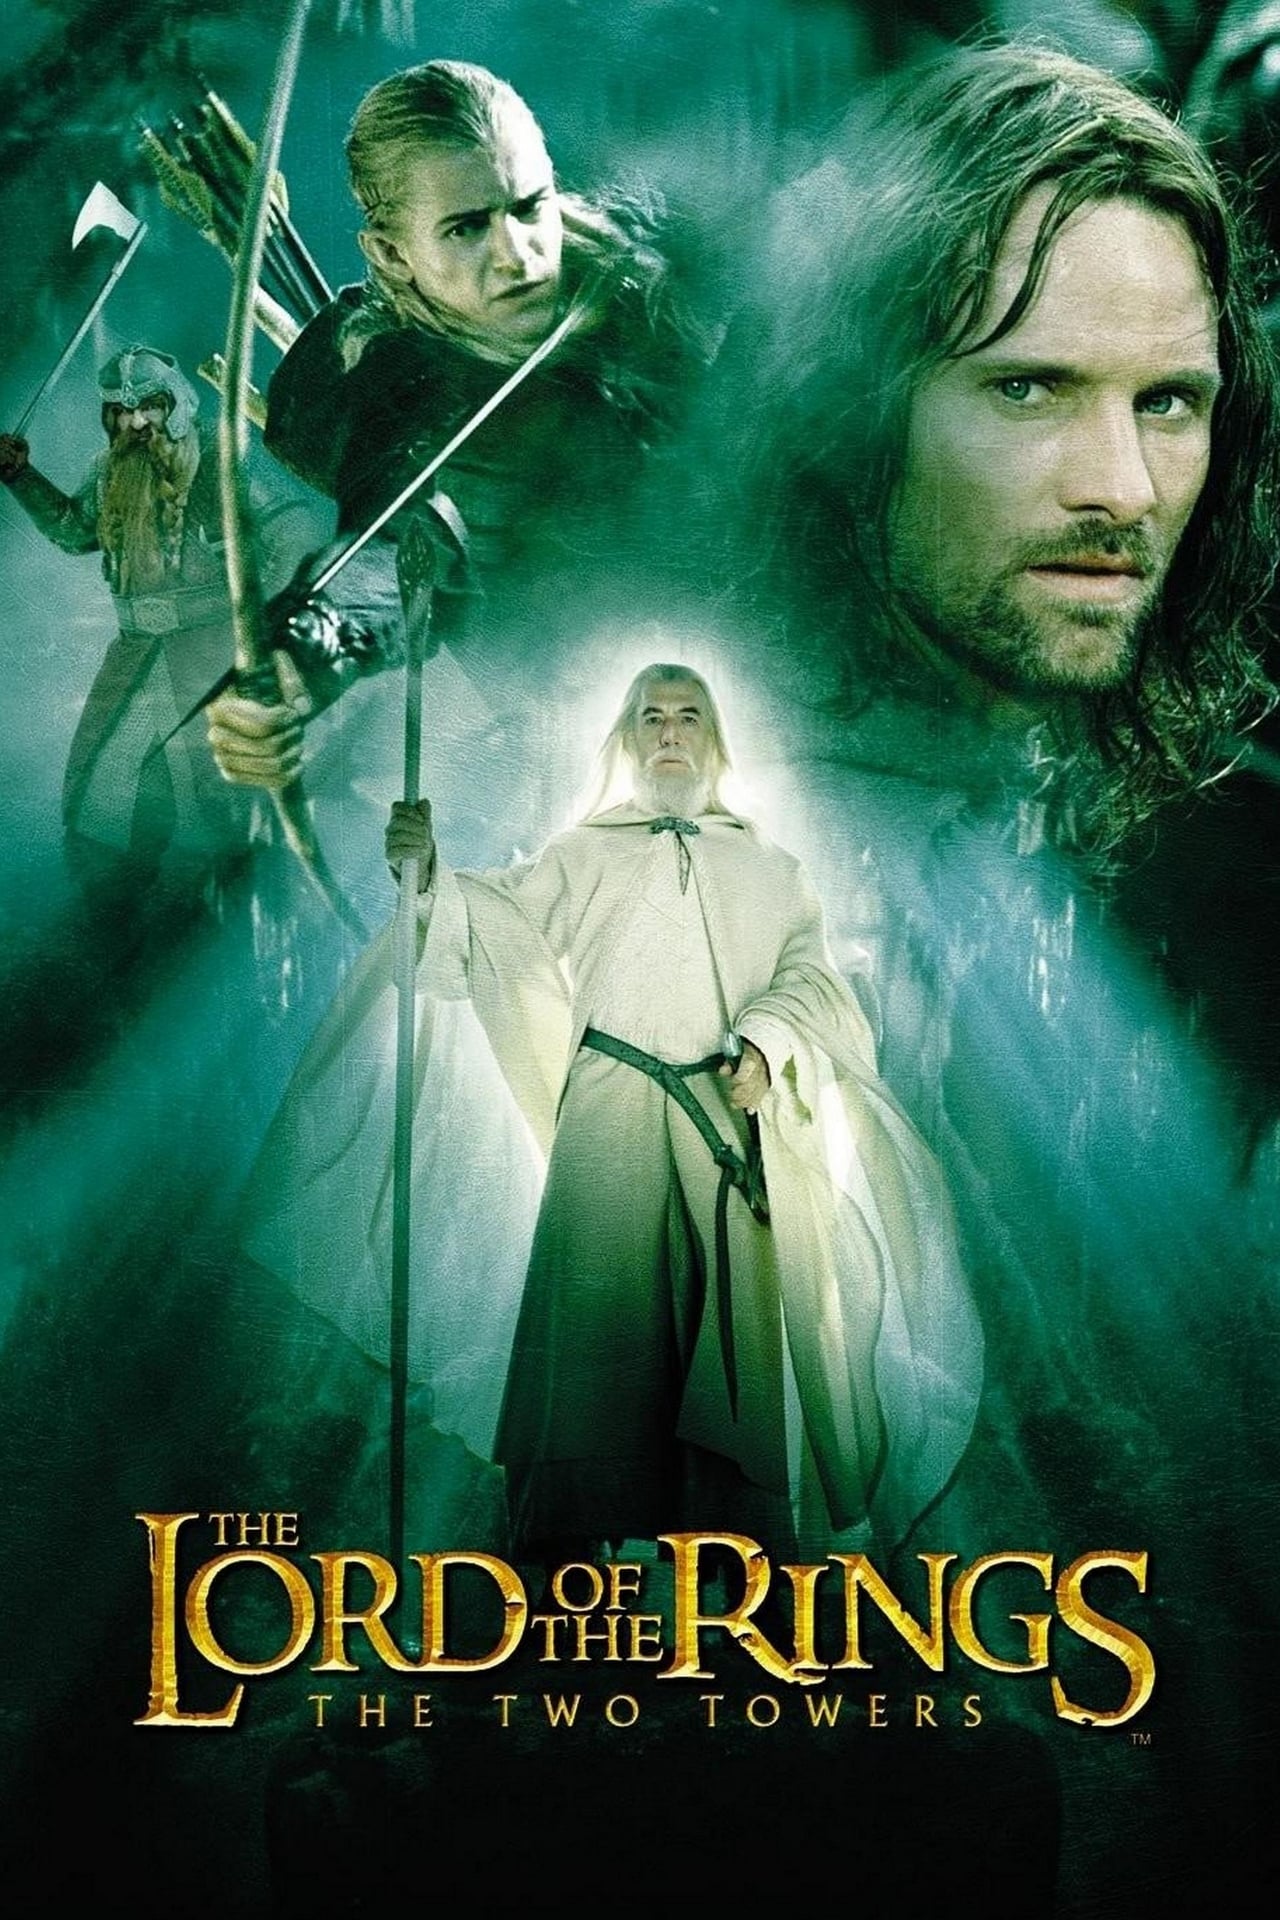 The Lord of the Rings: The Two Towers instaling